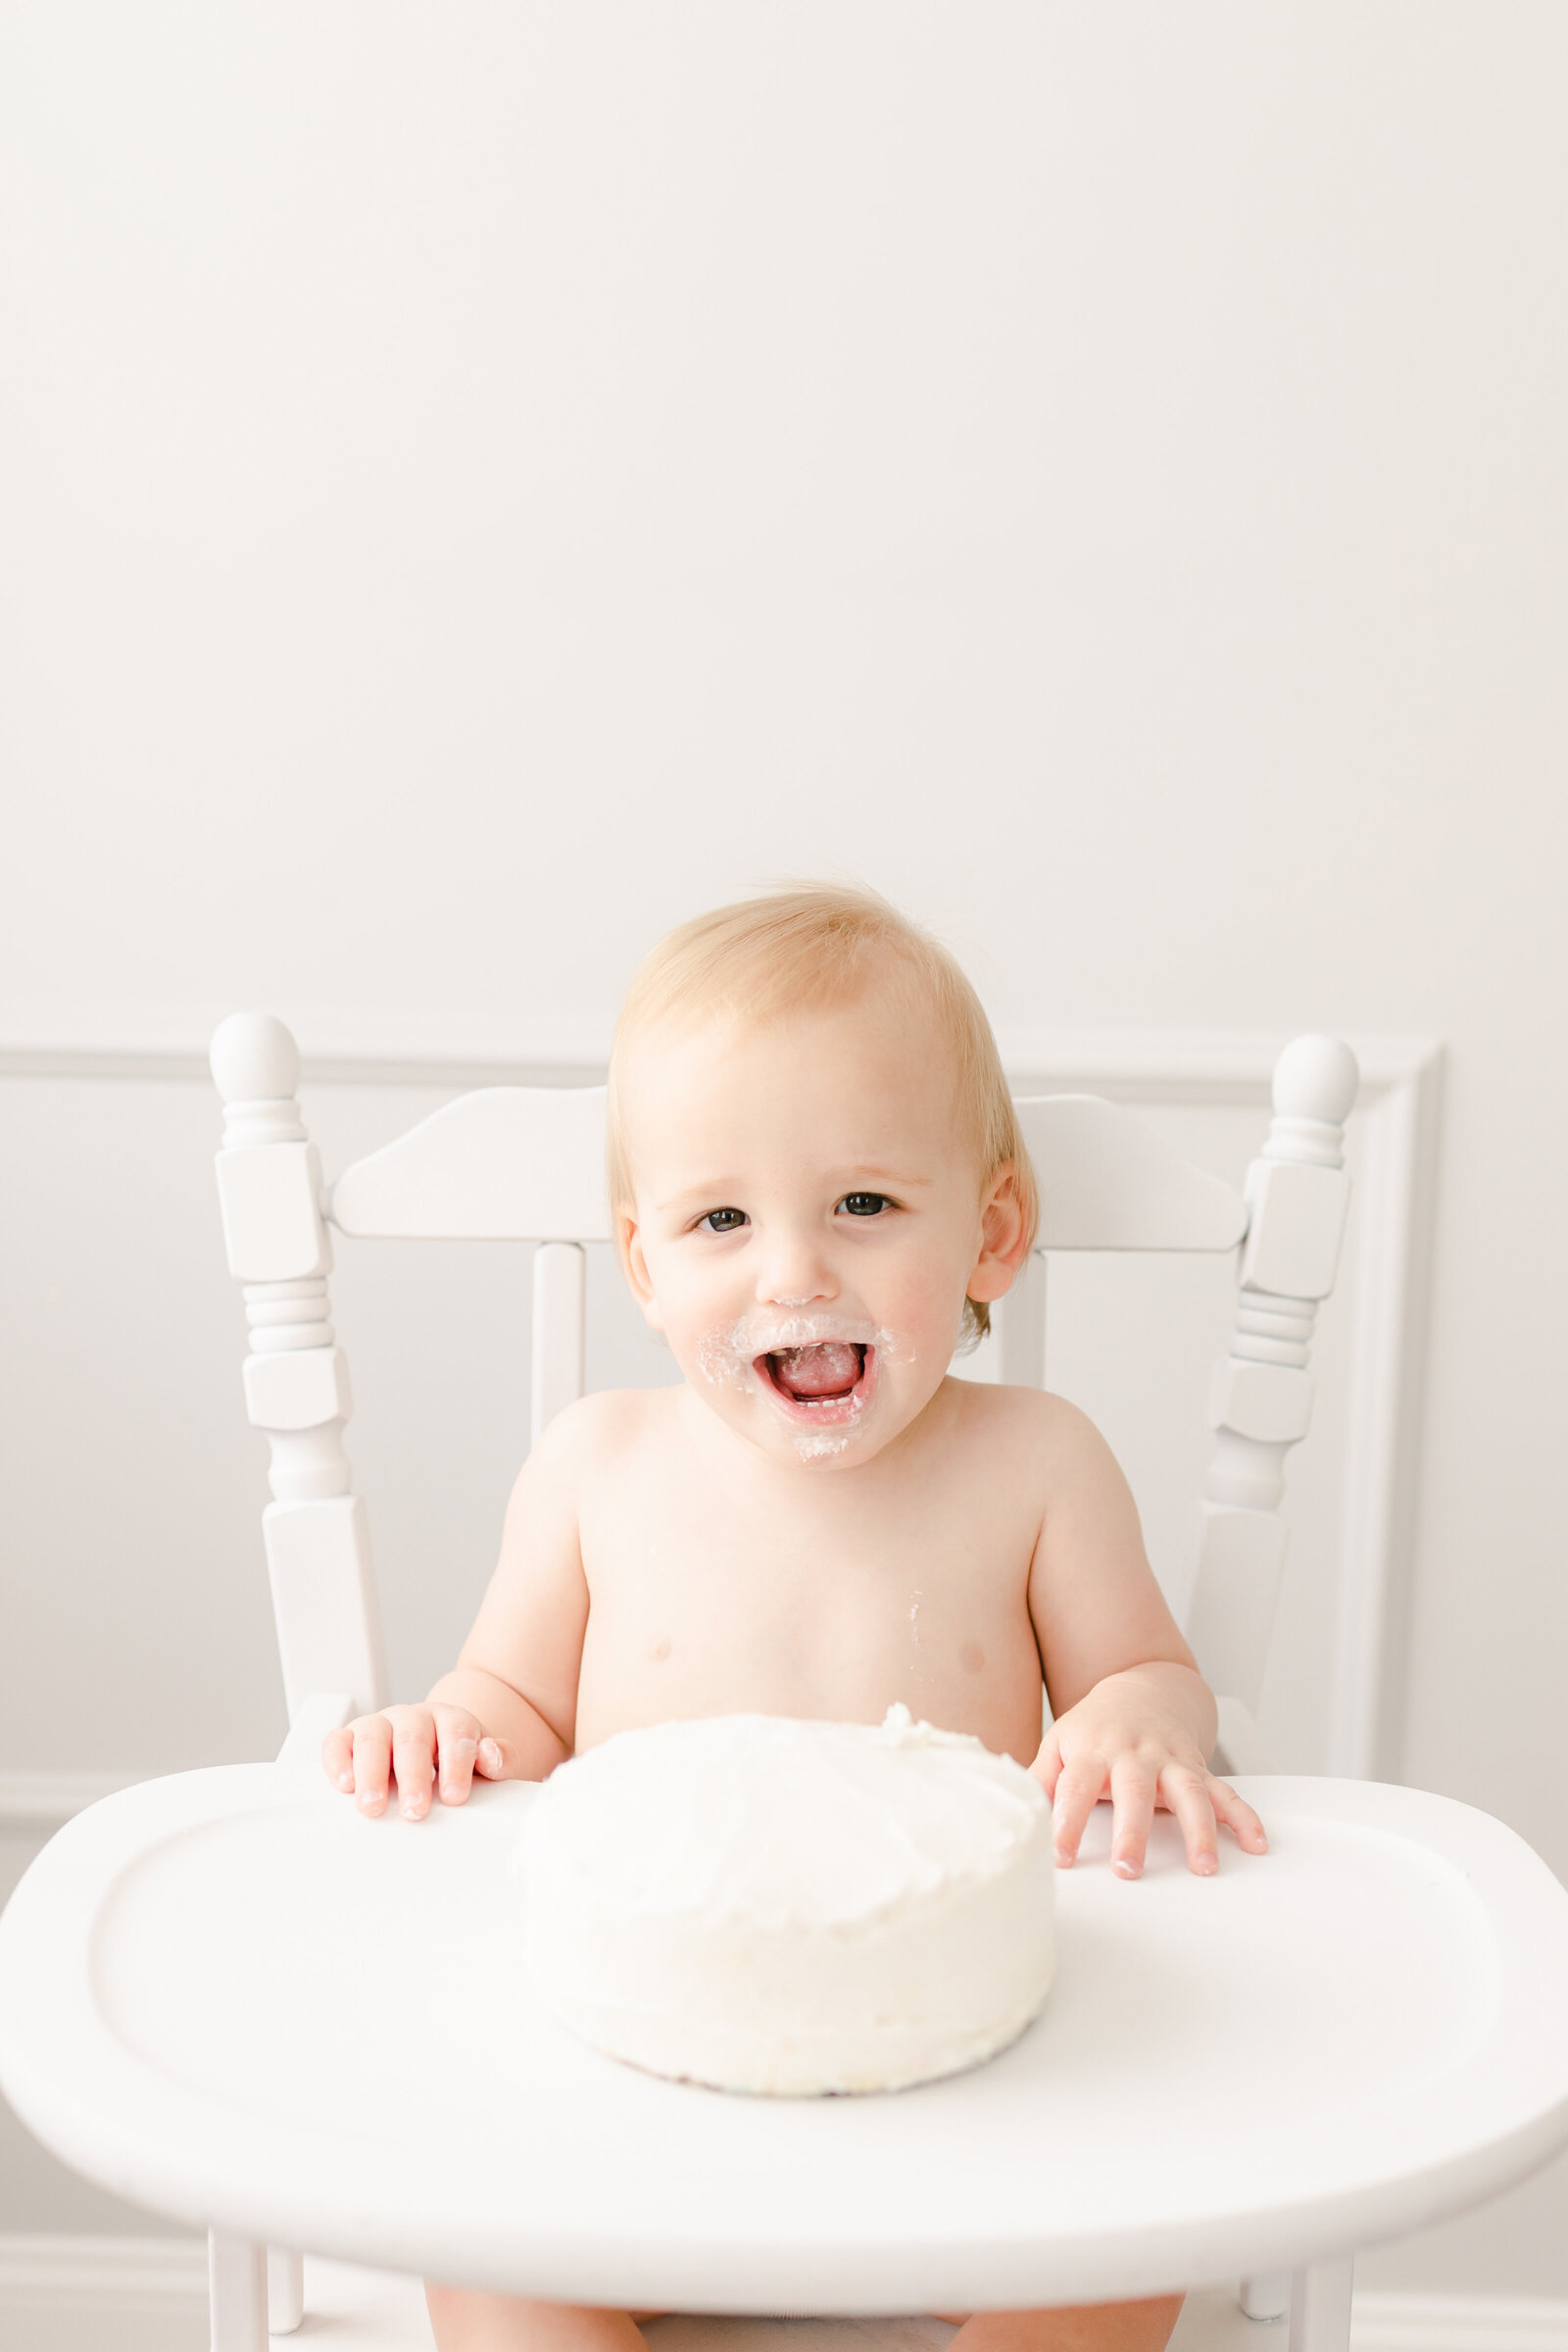 Little boy smiling in his high chair with white frosting on his face and a cake in front of him